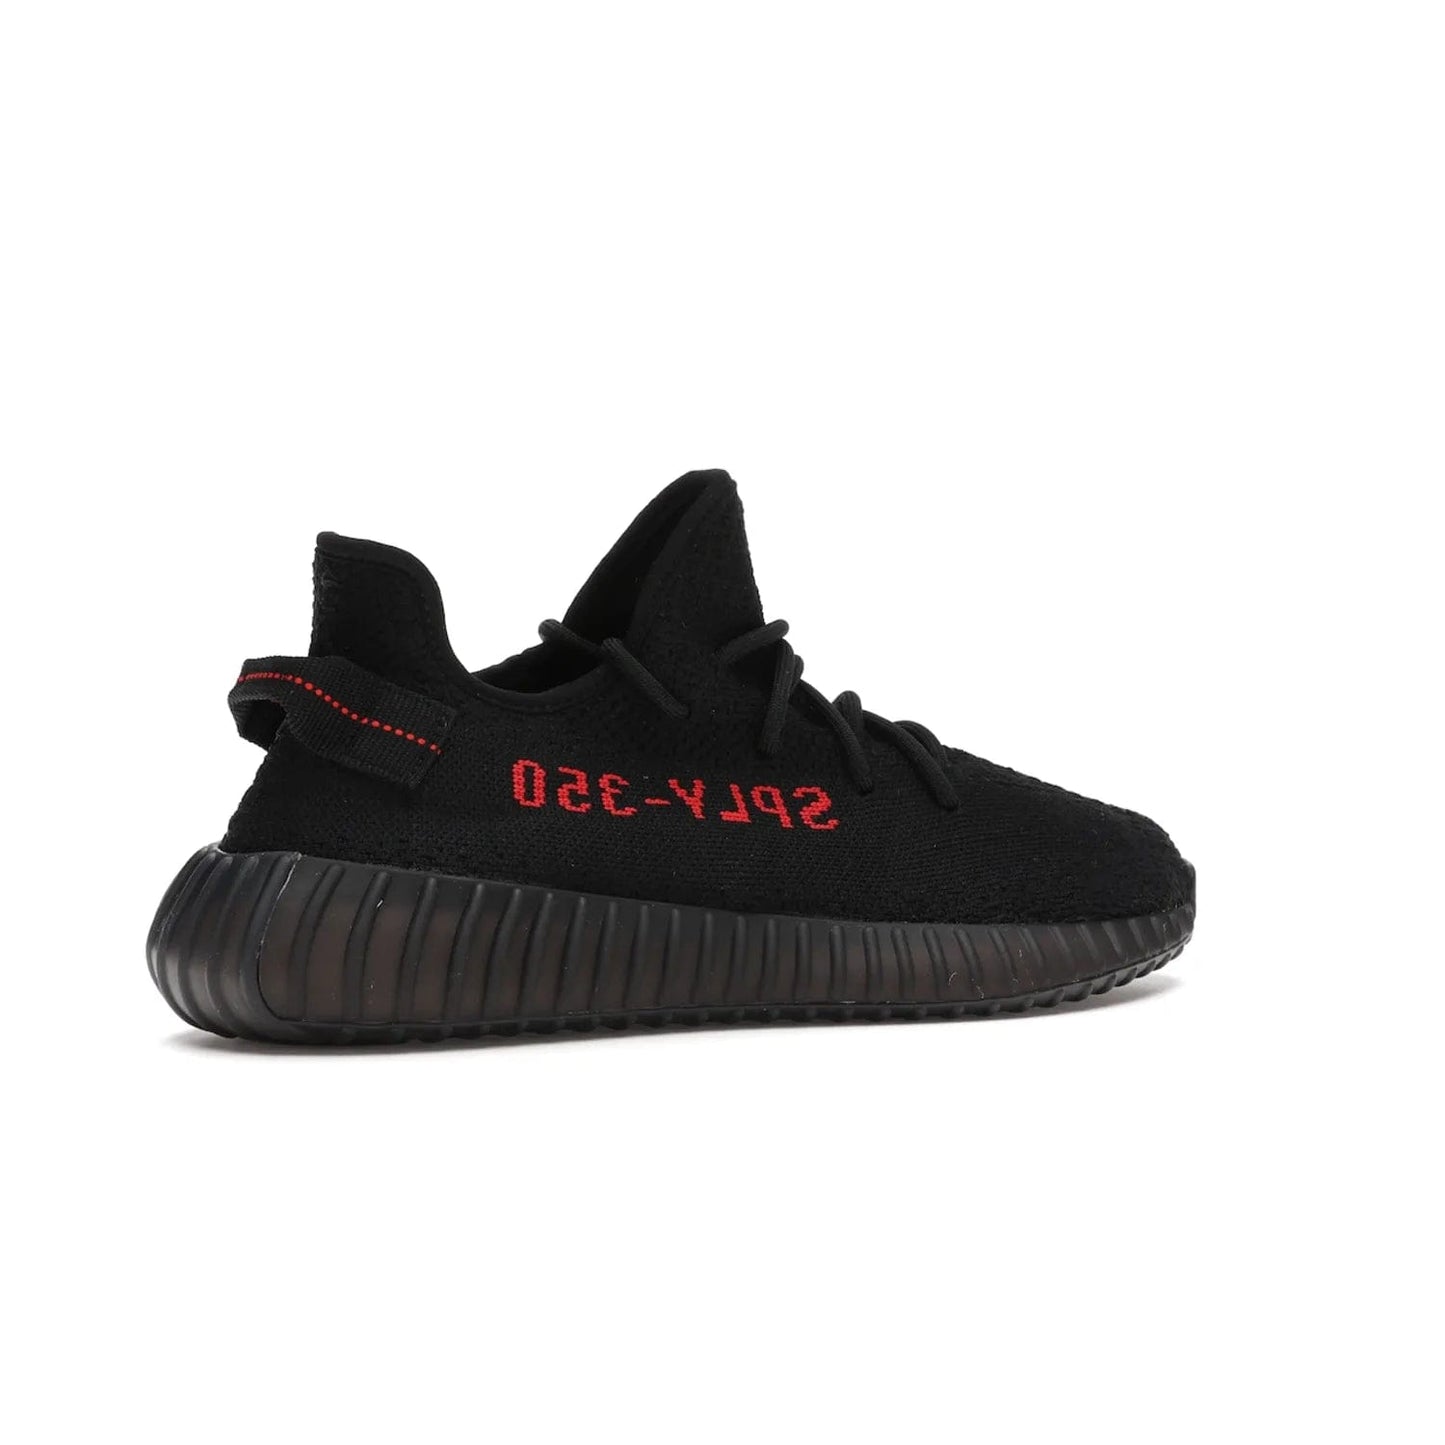 adidas Yeezy Boost 350 V2 Black Red (2017/2020) - Image 34 - Only at www.BallersClubKickz.com - Adidas Yeezy Boost 350 V2 Black Red: a classic colorway featuring black Primeknit upper, BOOST cushioning system, and iconic "SPLY-350" text. Released in 2017 for a retail price of $220.